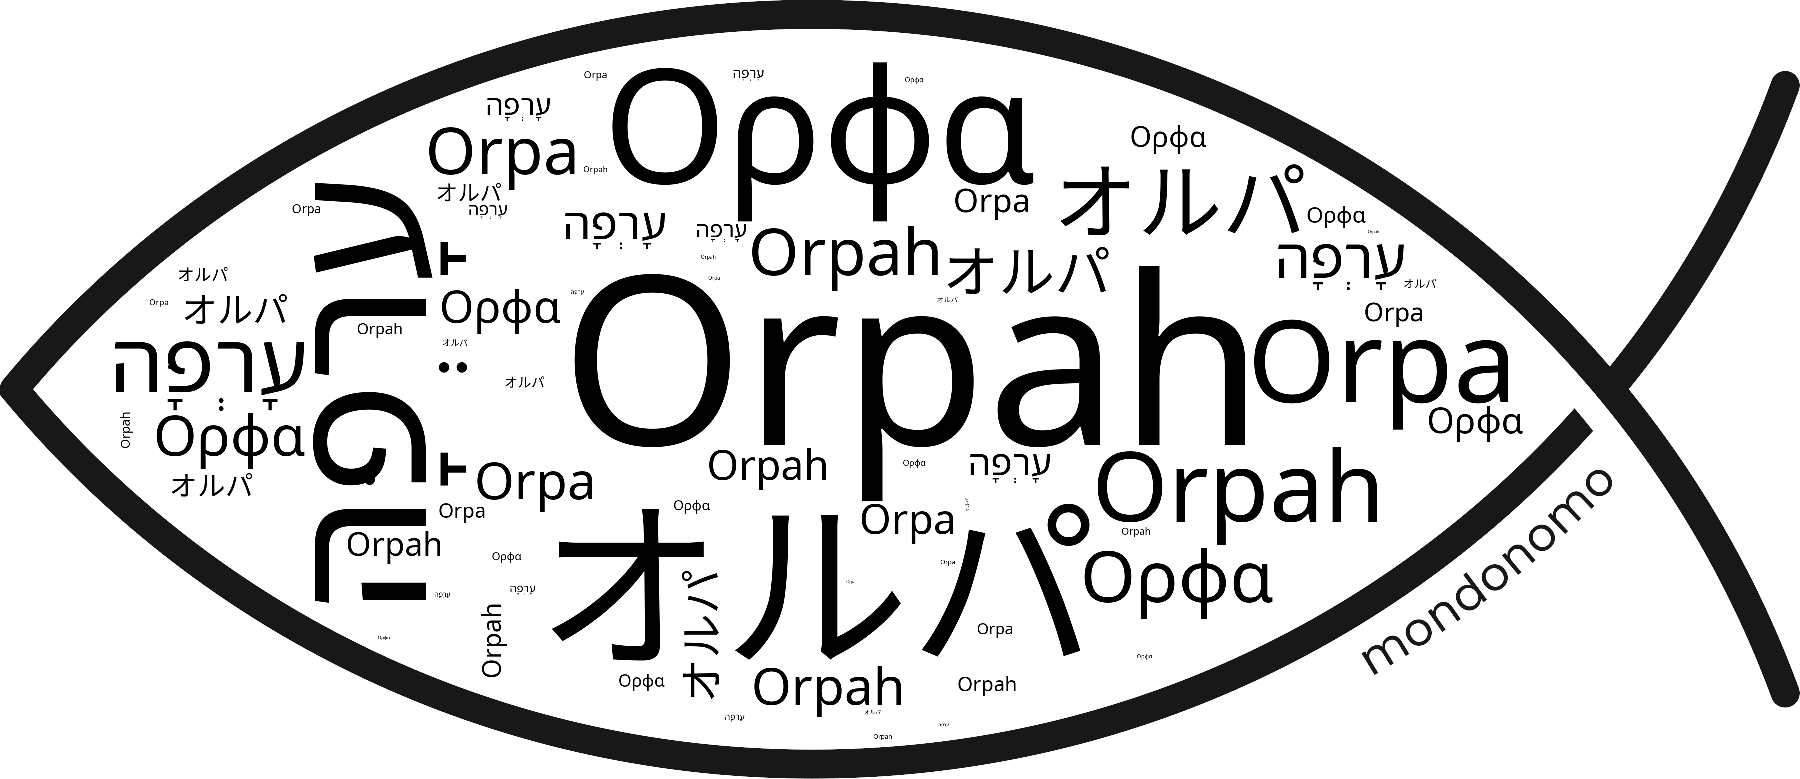 Name Orpah in the world's Bibles